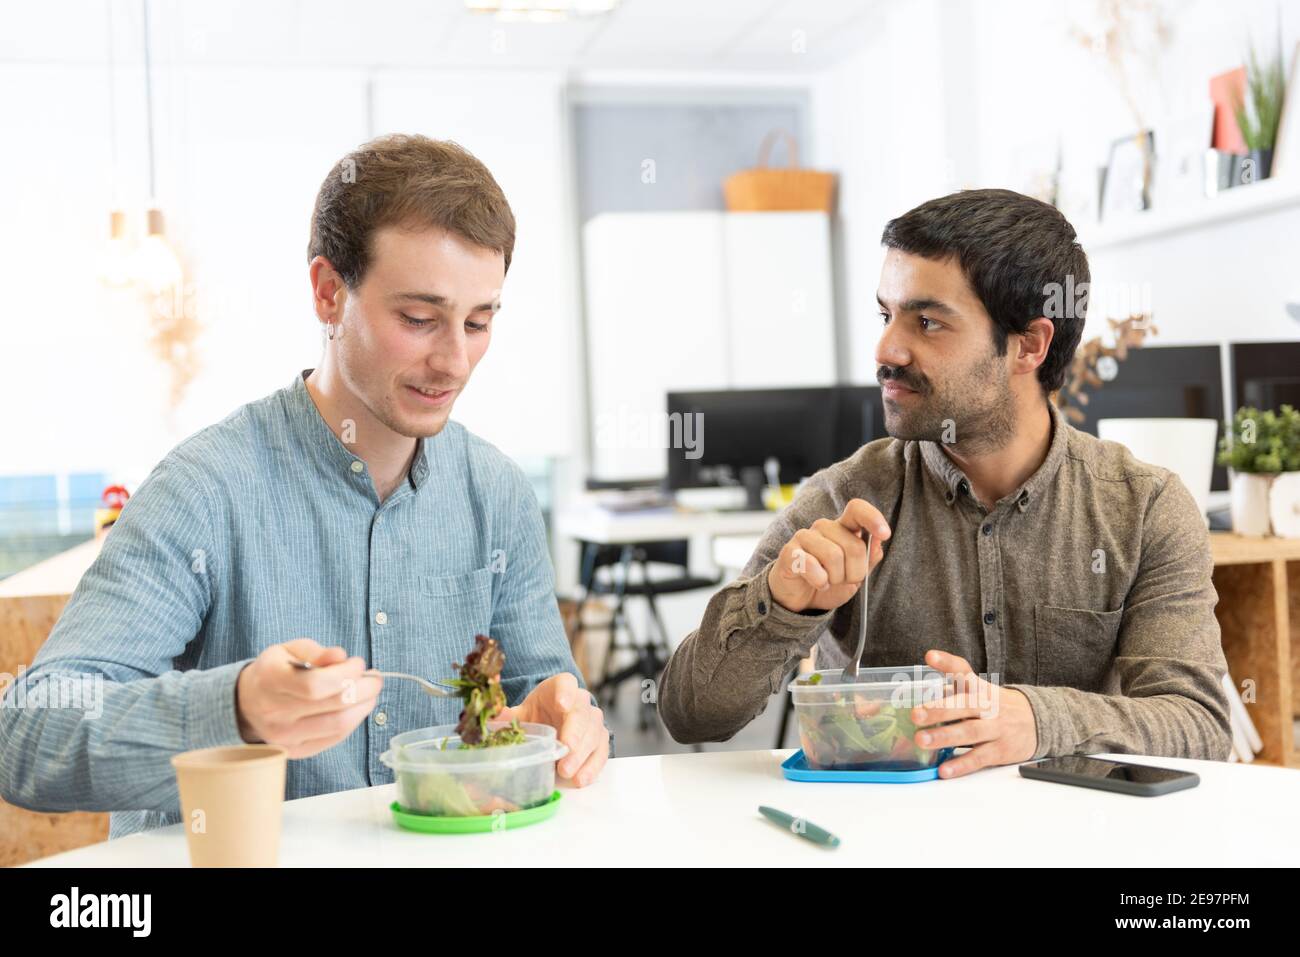 Healthy food in the workplace concept. Two coworkers having lunch in the office. Stock Photo